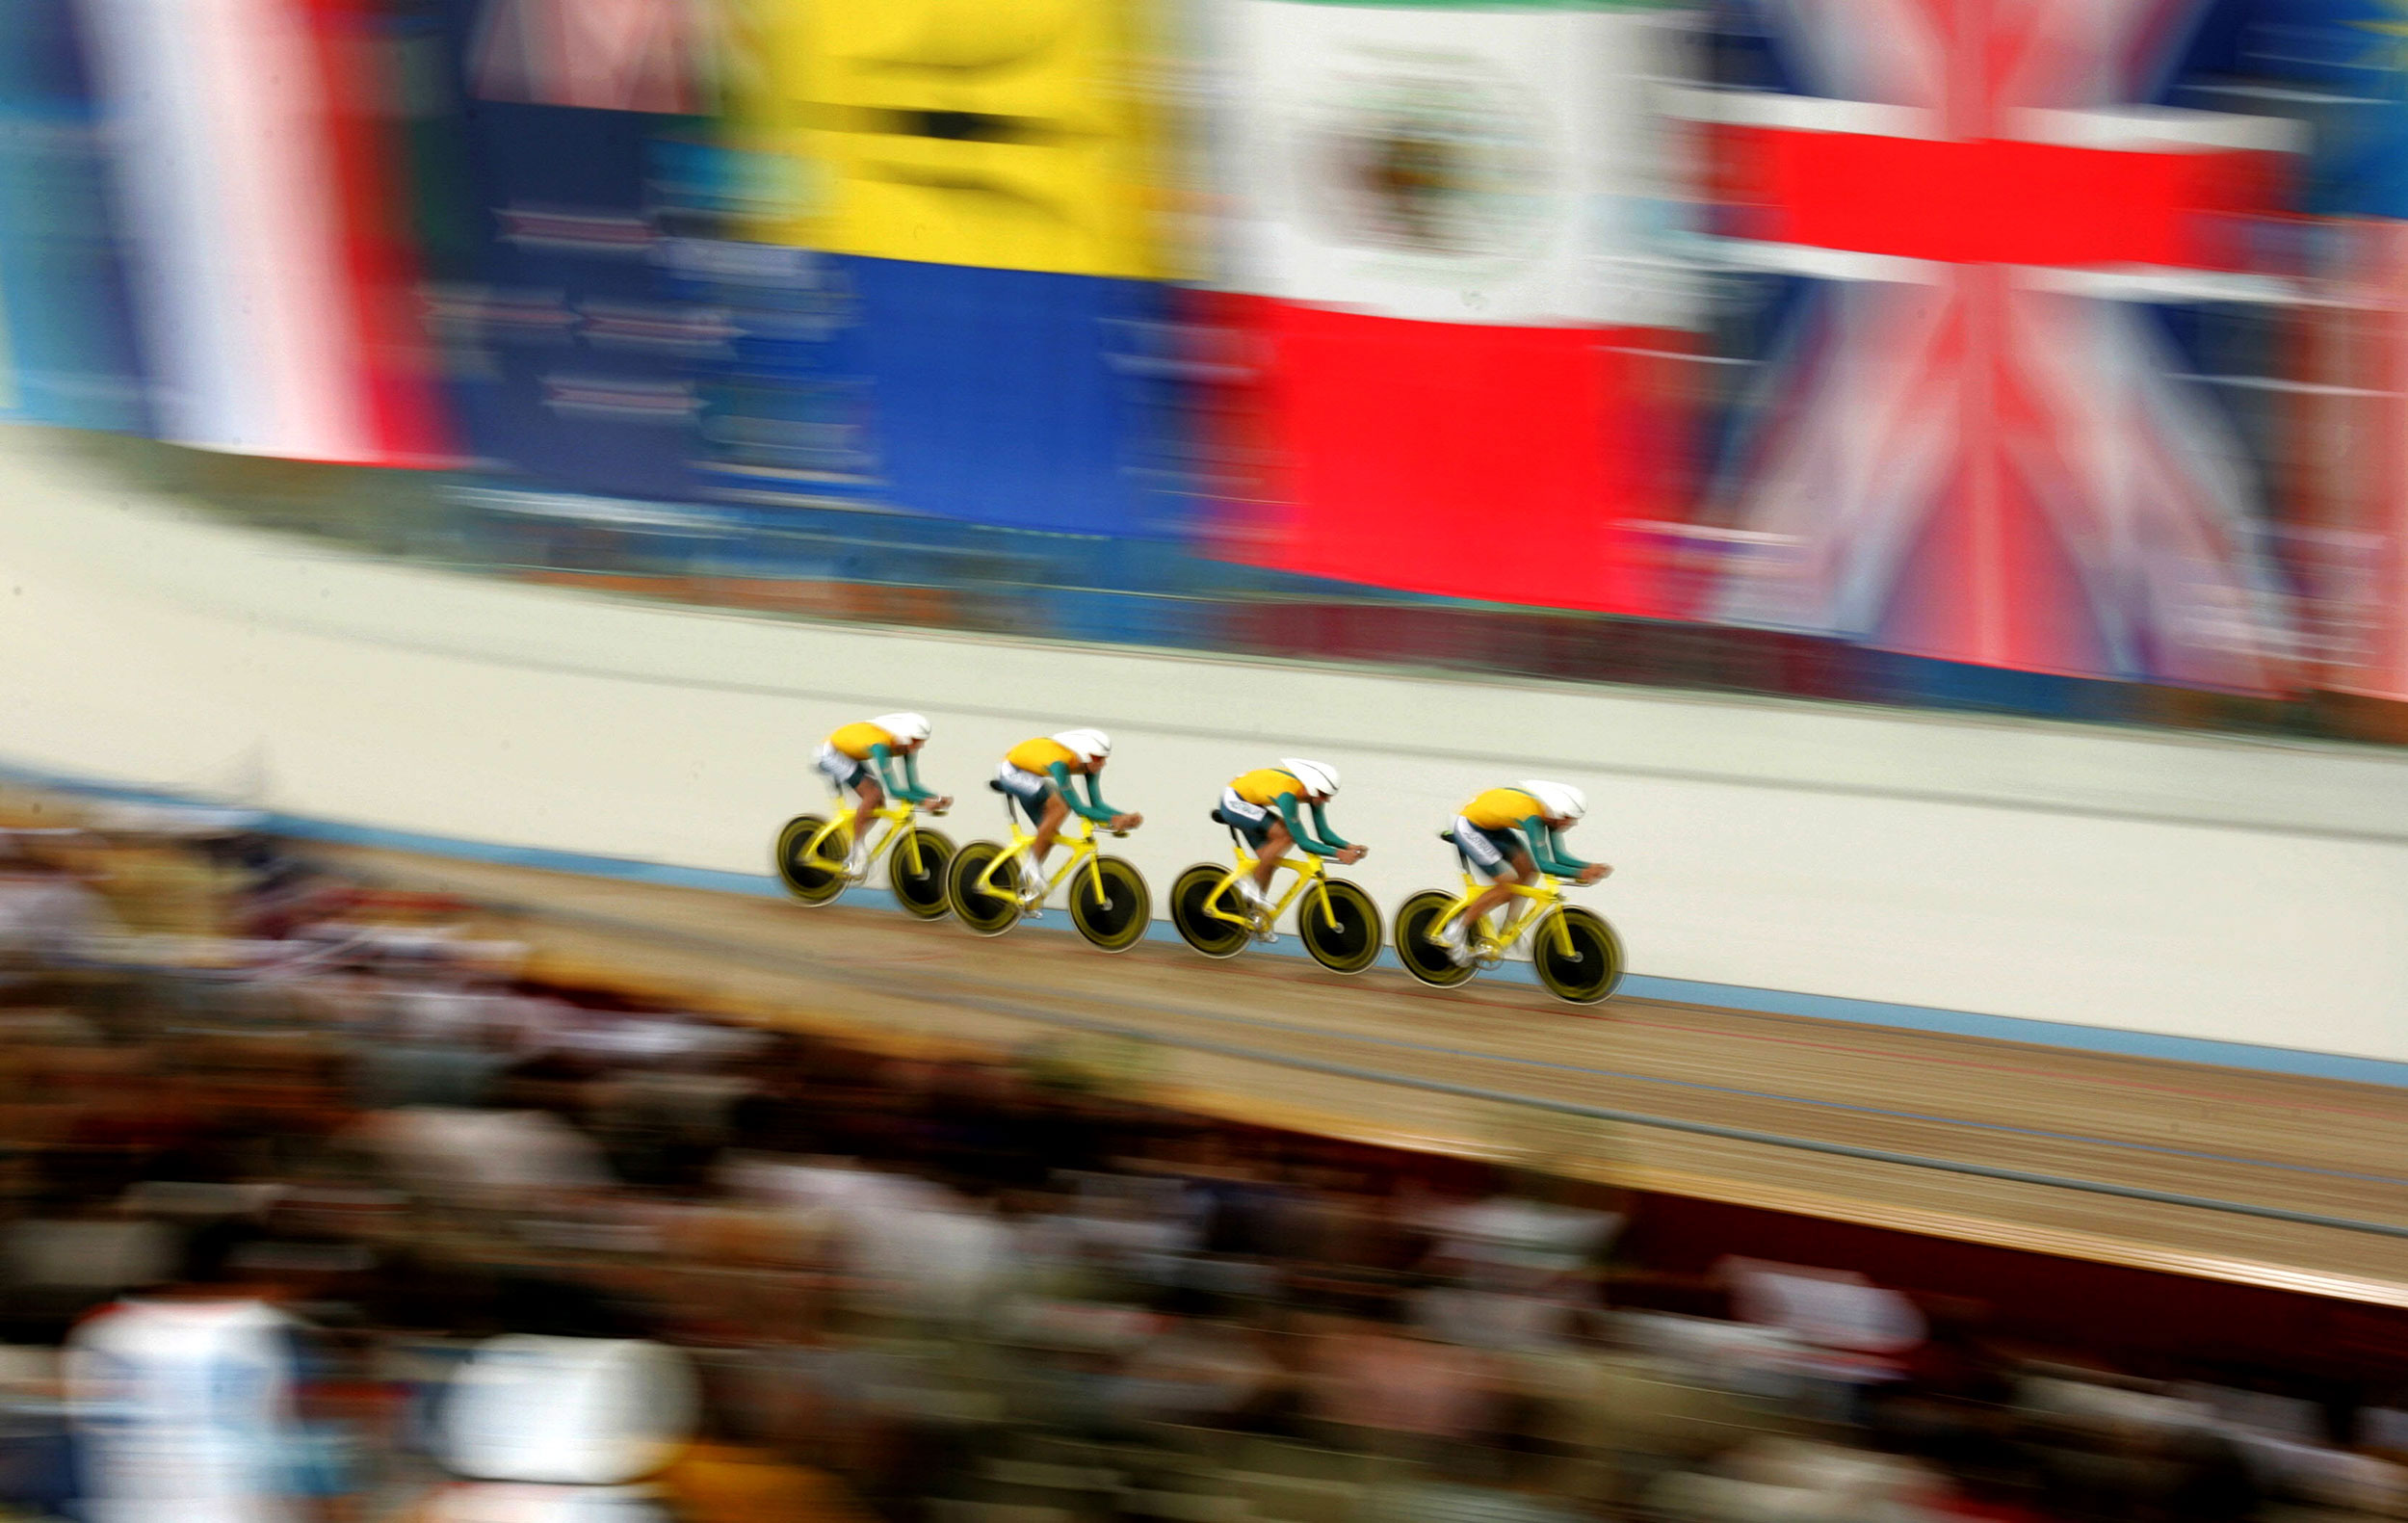   Athens Olympics 2004 Day 09 - Cycling - Australian team of Graeme Brown, Peter Dawson, Brett Lancaster and Stephen Wooldridge in action during team pursuit qualifying. pic. Phil Hillyard.  